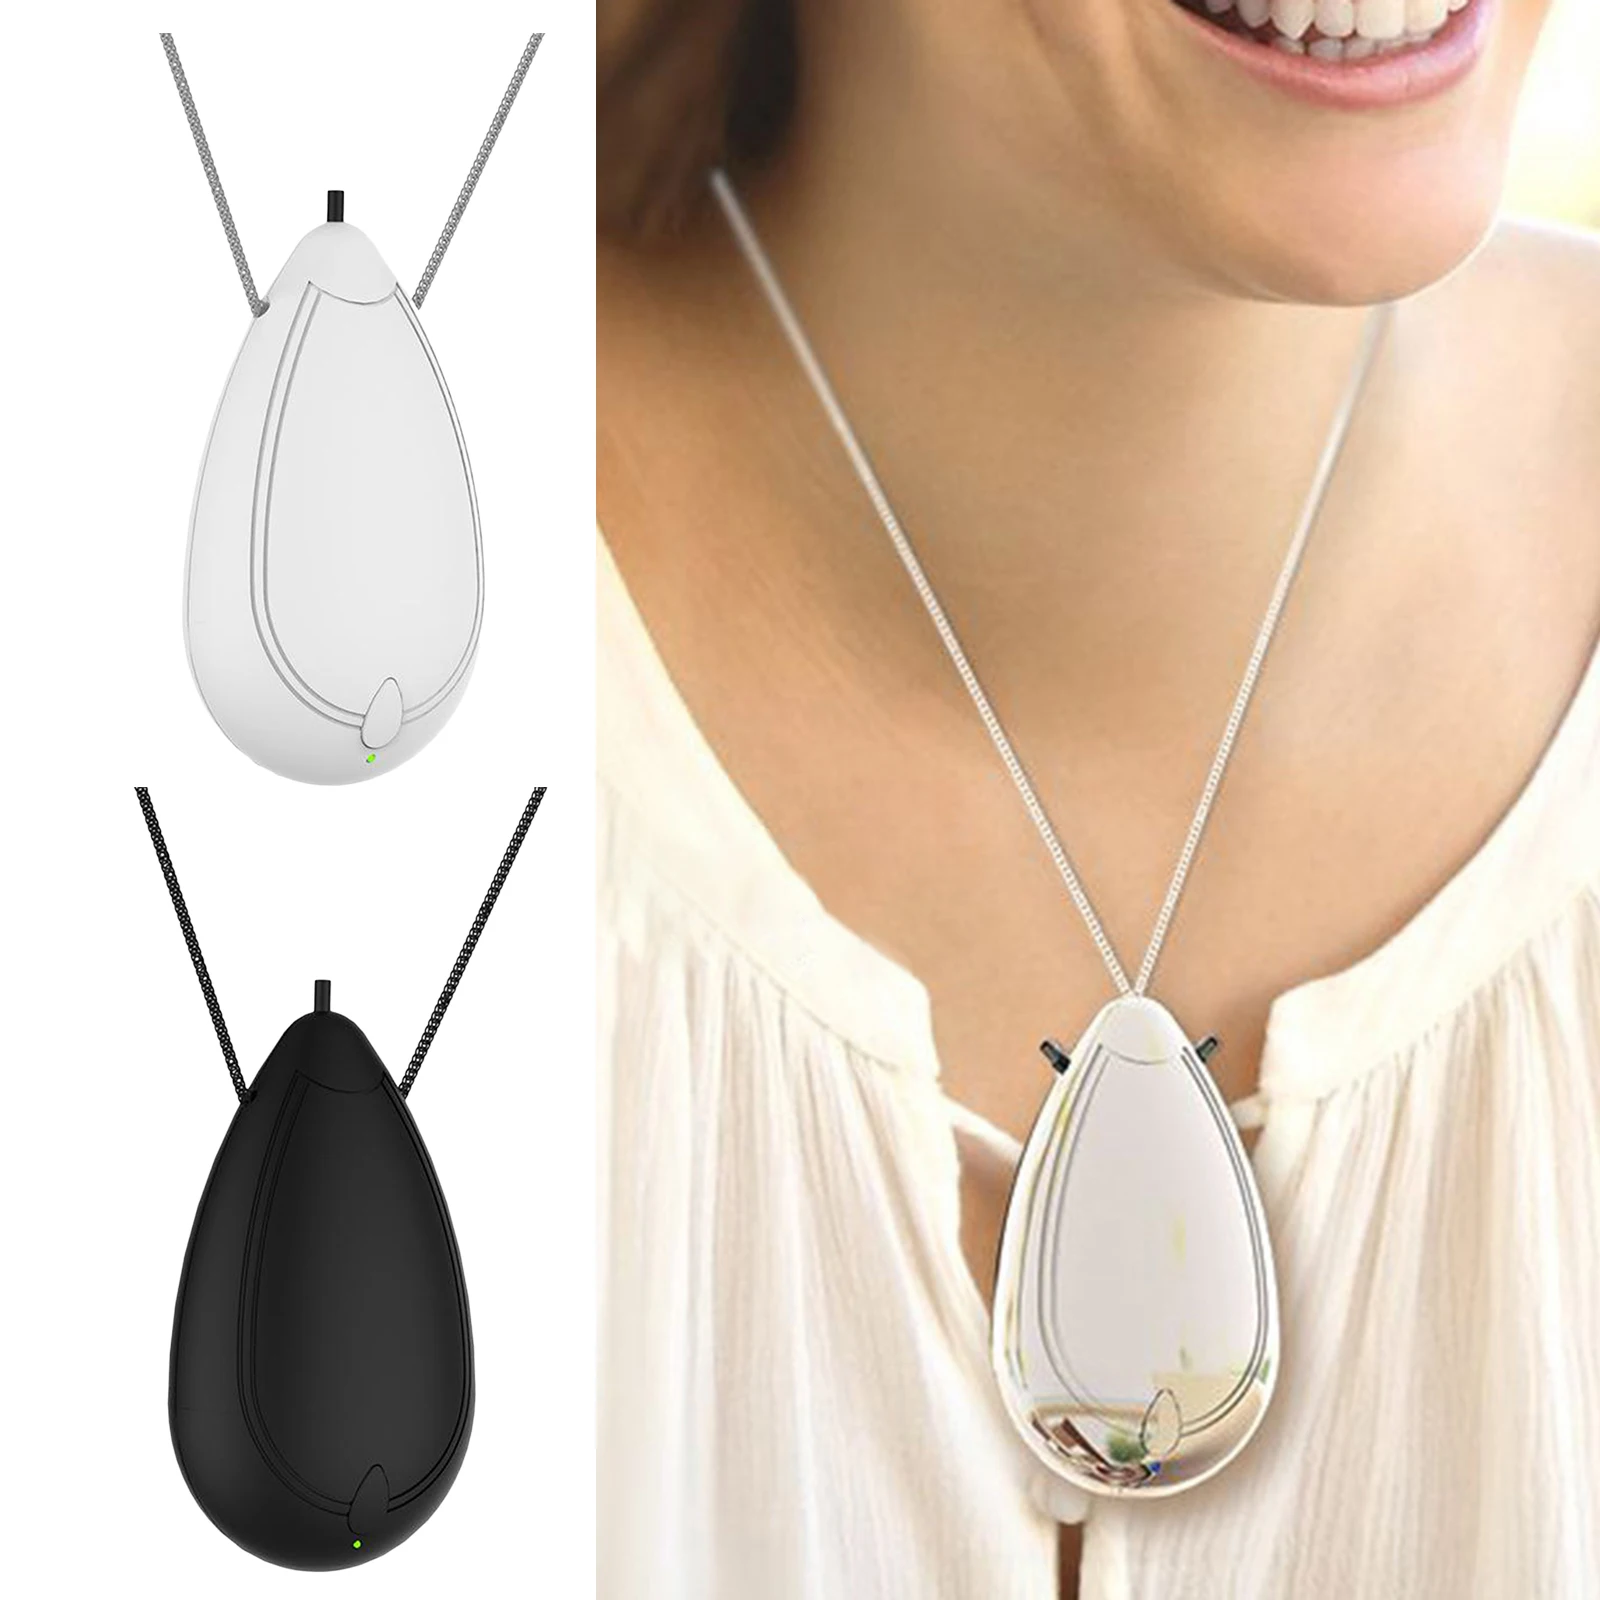 Wearable ,Personal  Necklace Around The Neck,Travel  ,Remove Smoke Smell,Protable Ionic  Gifts